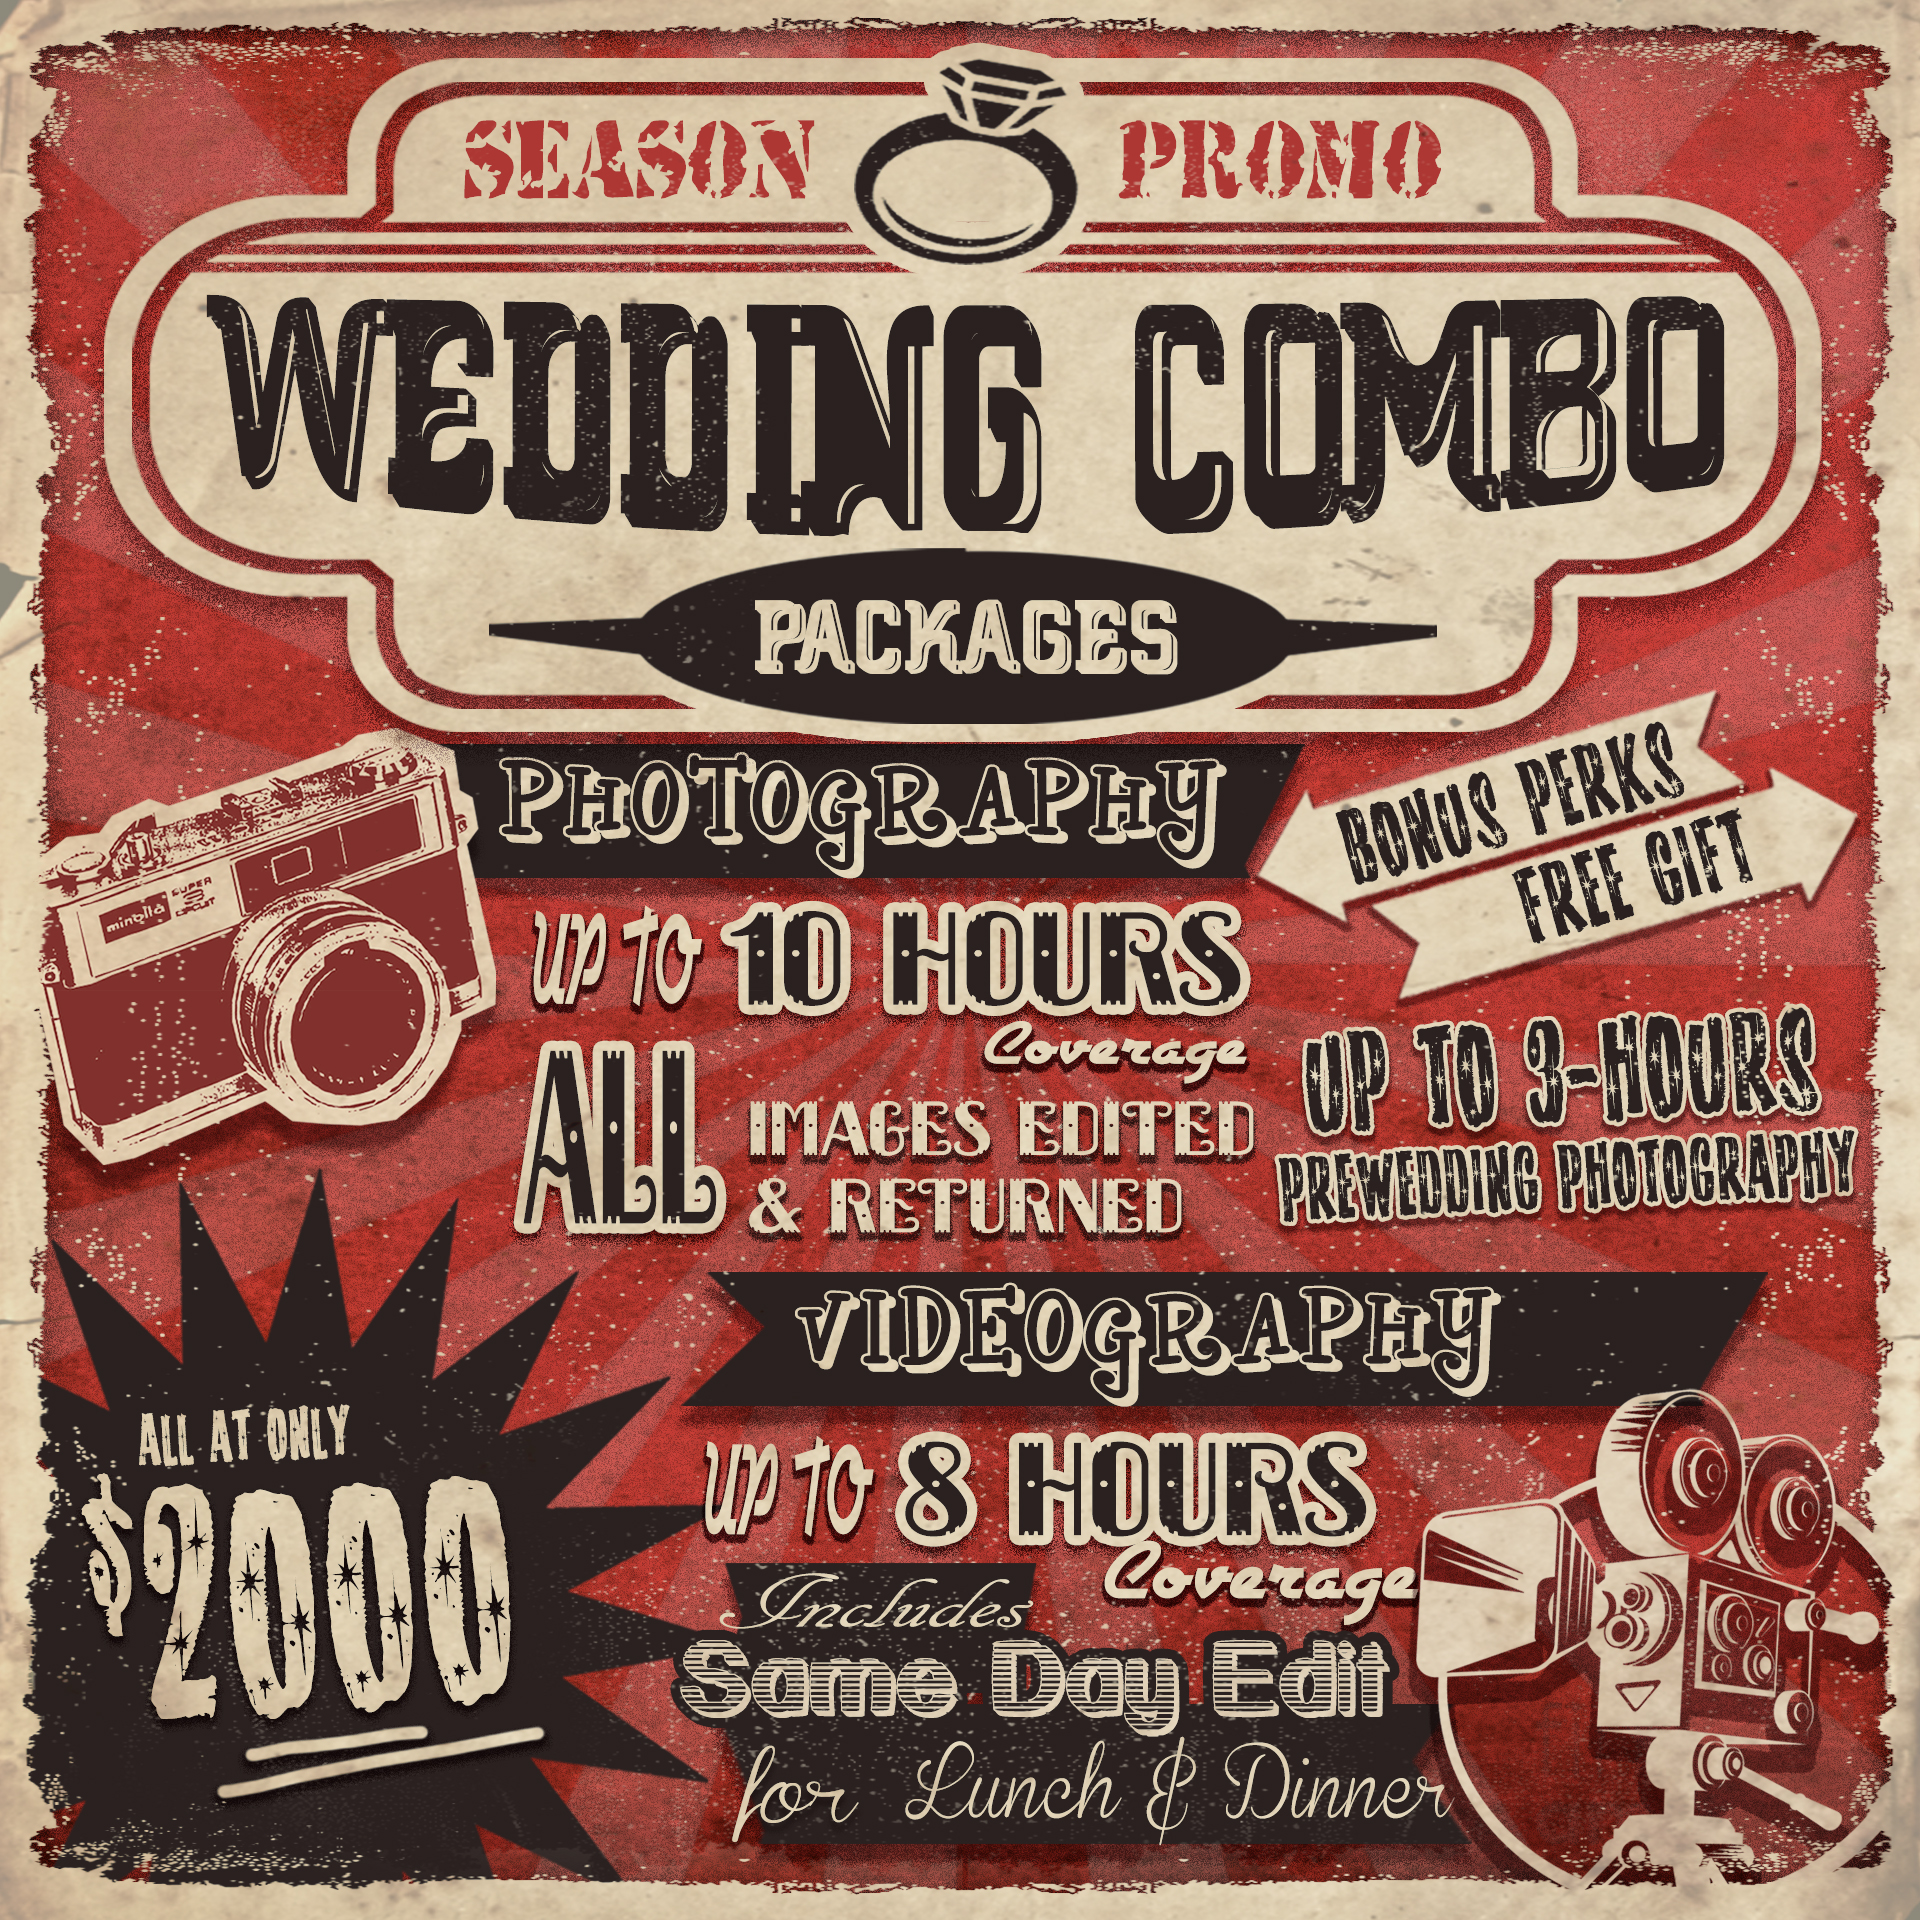 Affordable Wedding Packages